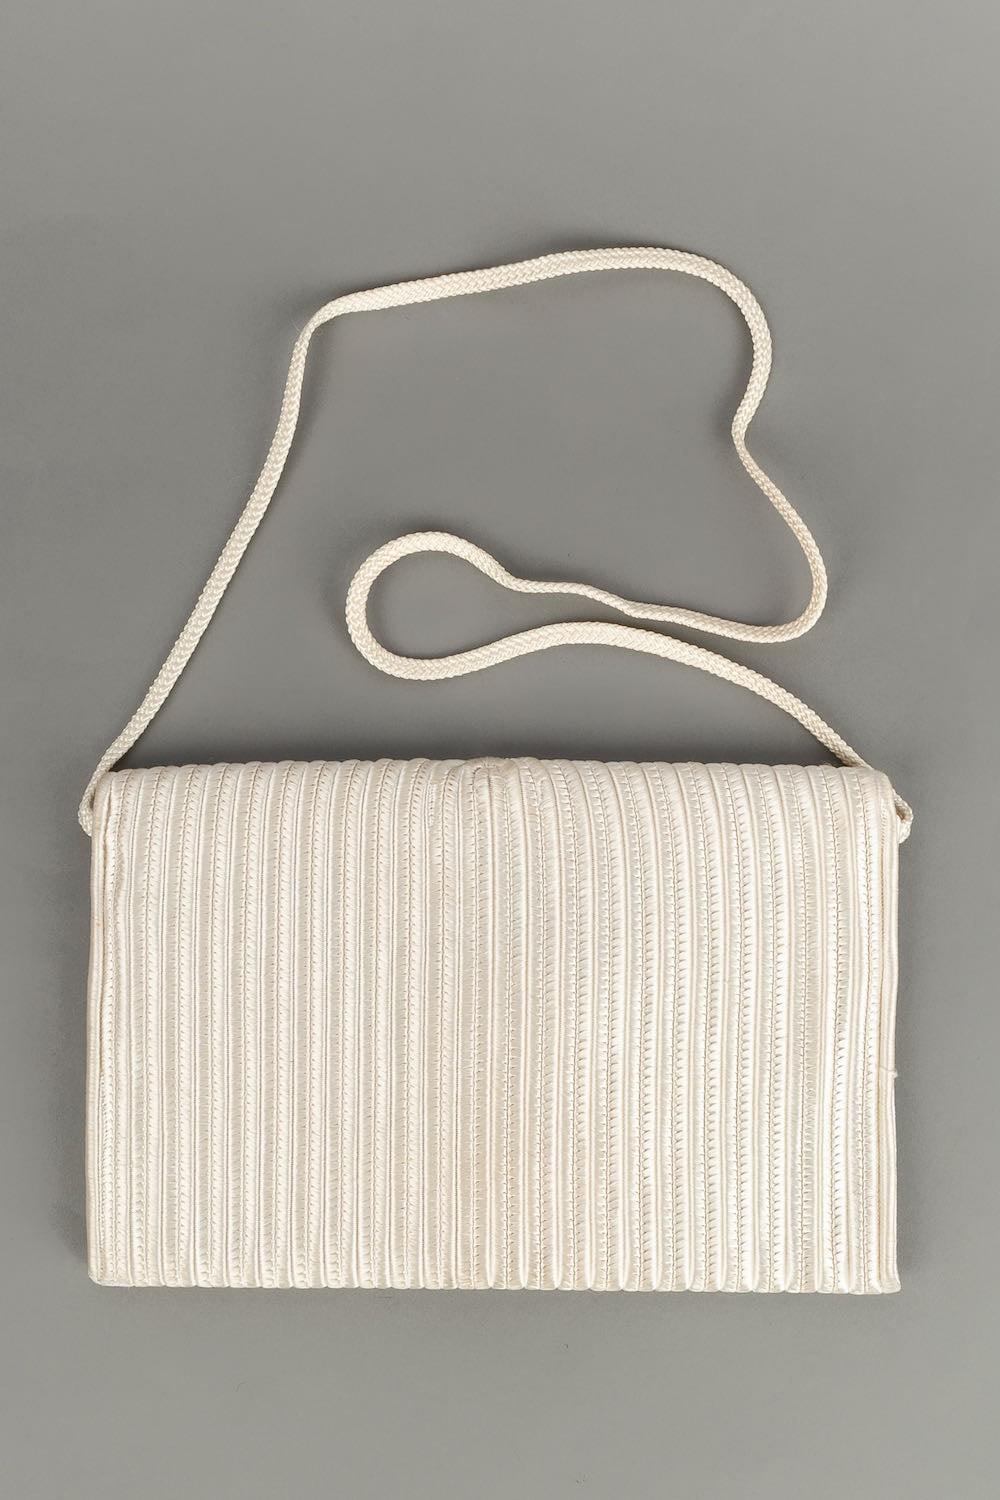 Nina Ricci -(Made in France) Passementerie pouch.

Additional information: 
Dimensions: Width : 26 cm, Height : 17 cm, Handle : 89 cm
Condition: Very good condition
Seller Ref number: S54







